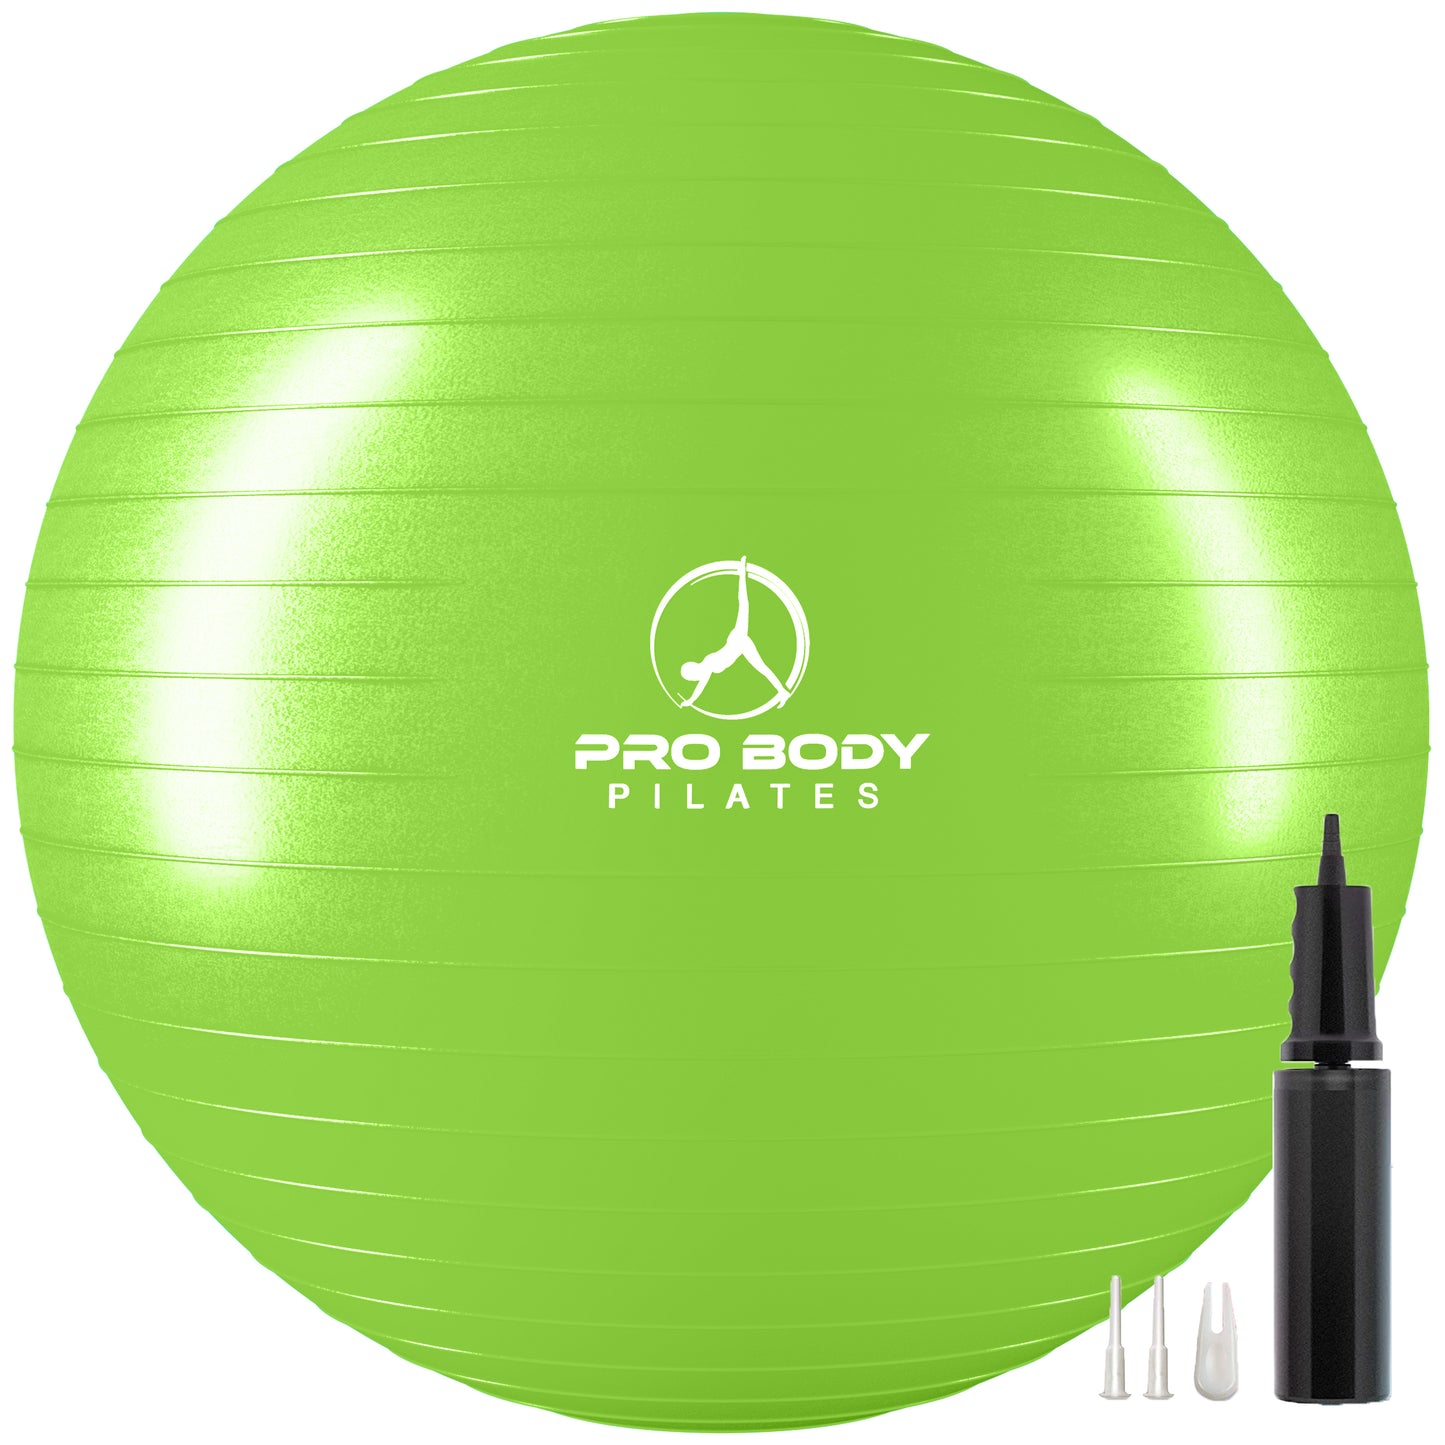 Yoga Ball for Pregnancy, Fitness, Balance, Workout at Home, Office and Physical Therapy (Lime)